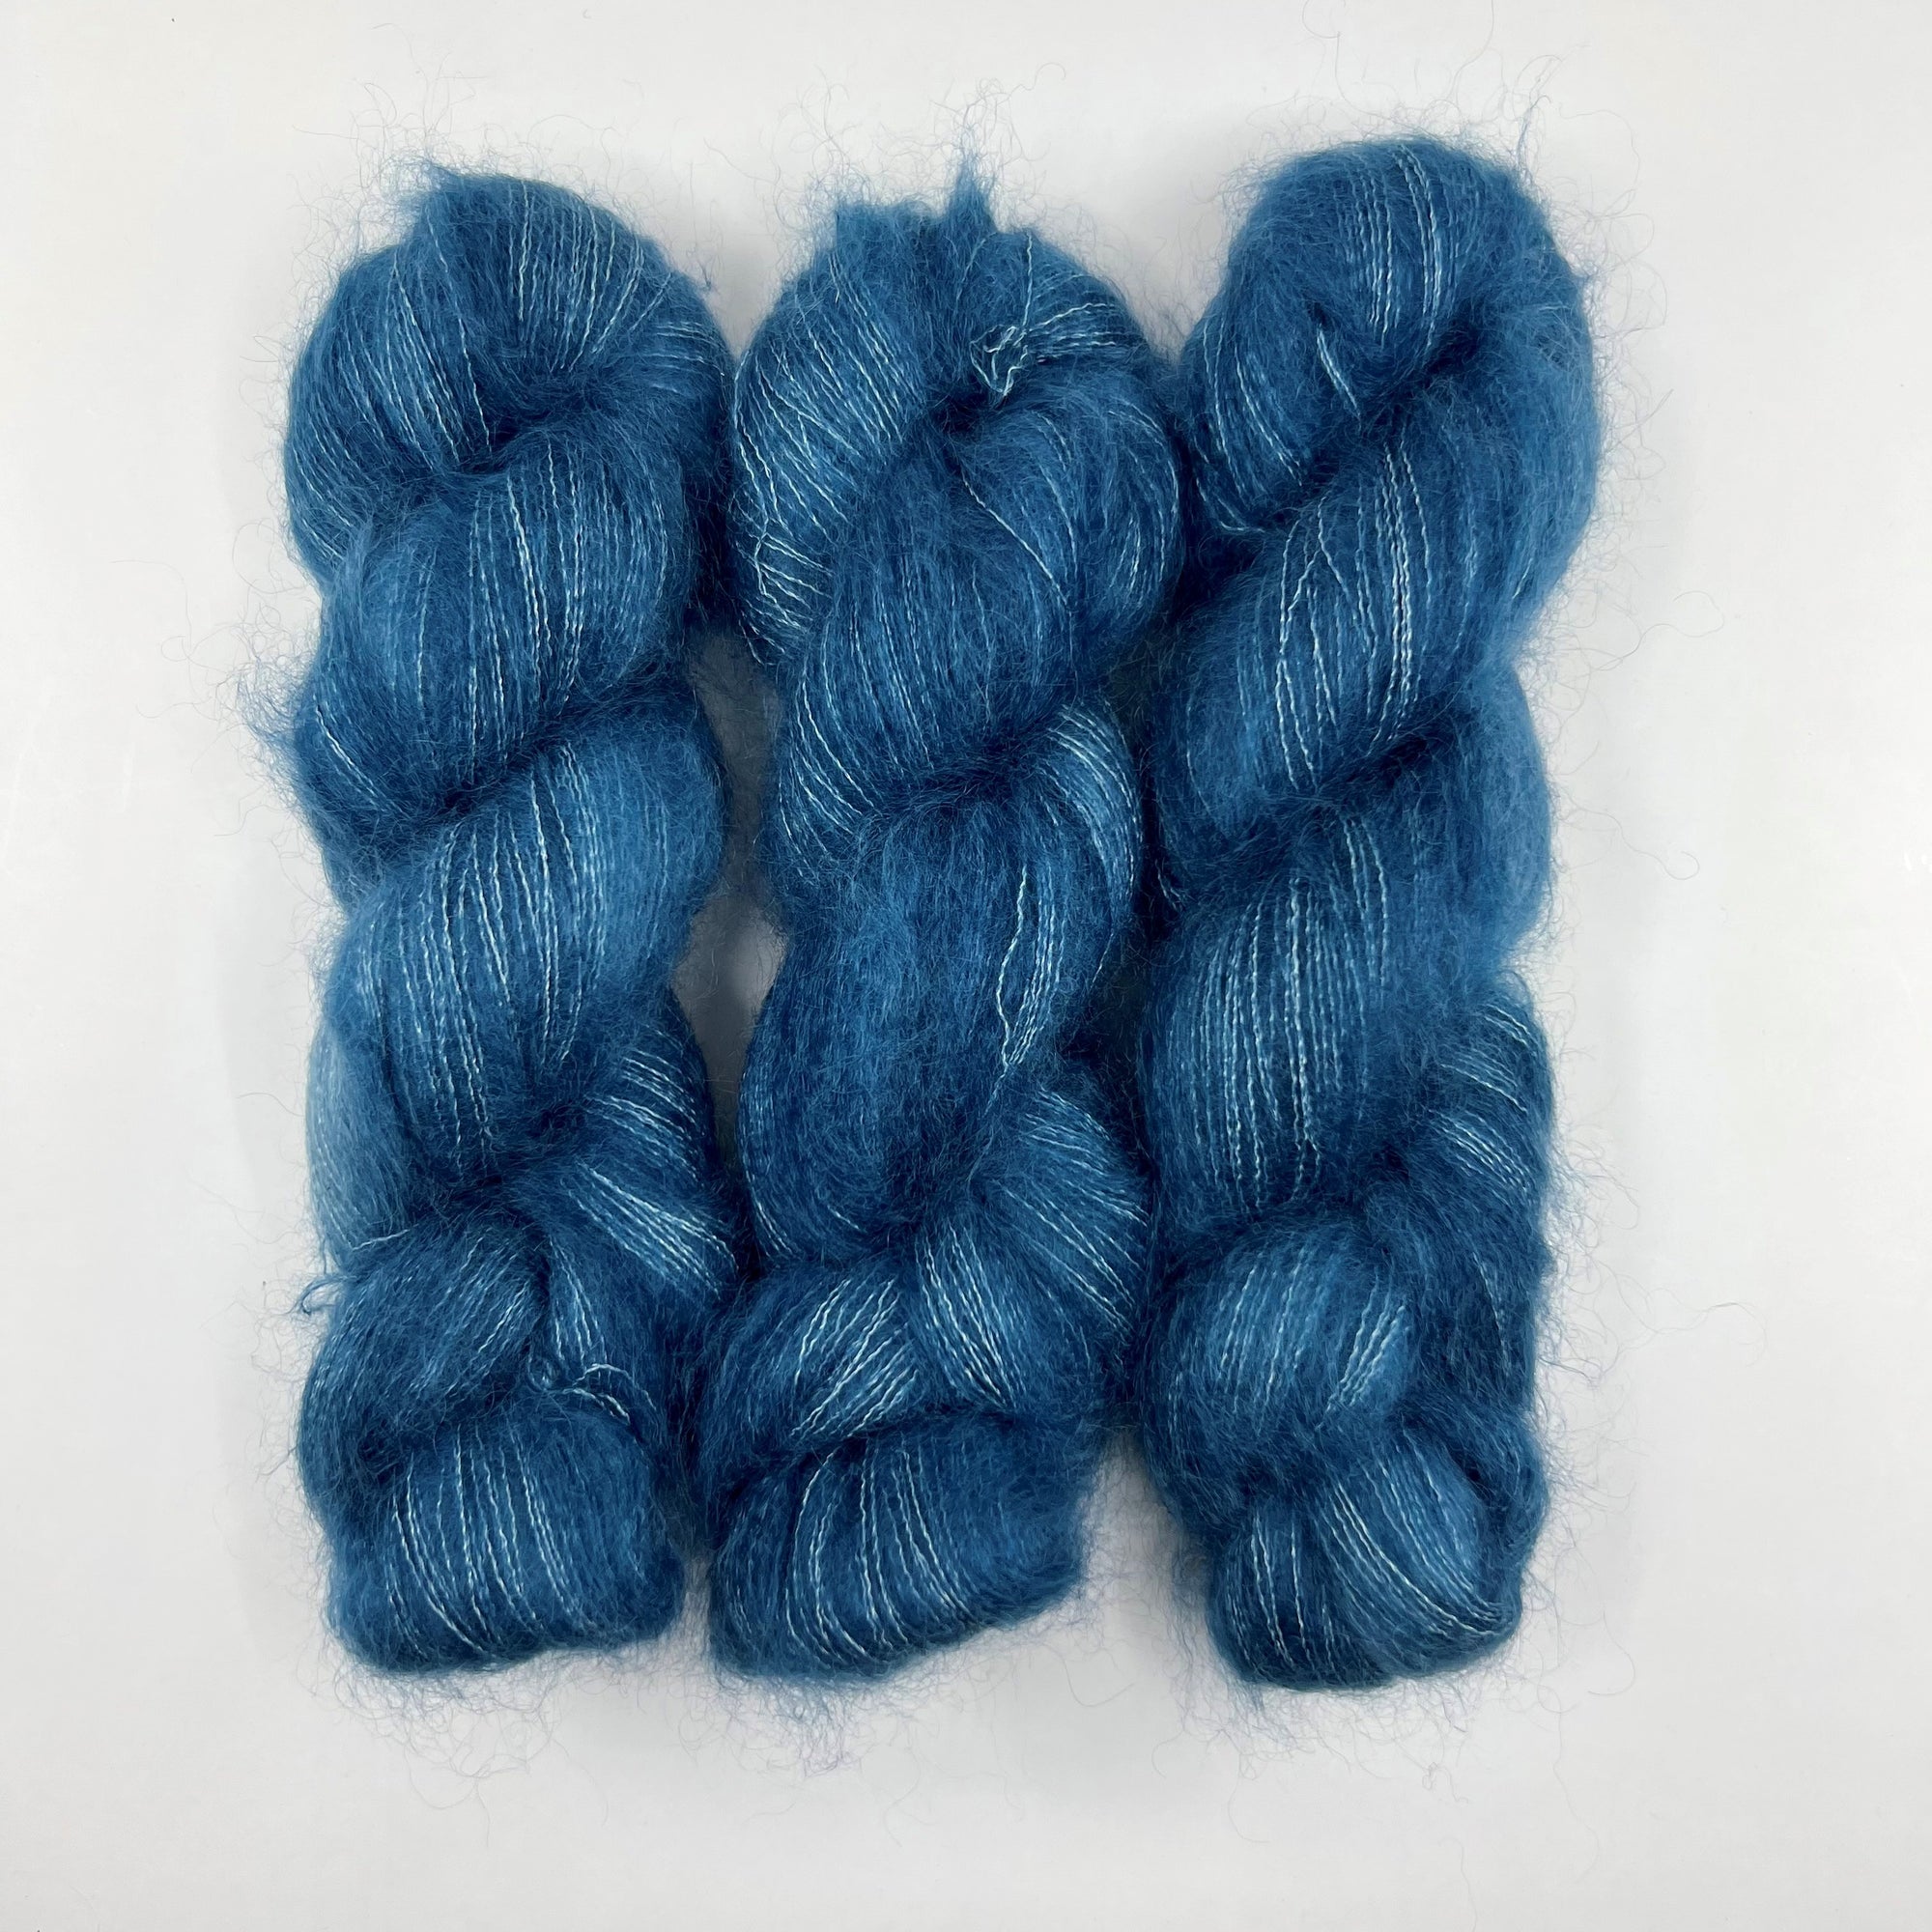 Adire - Delicacy Lace - Dyed Stock